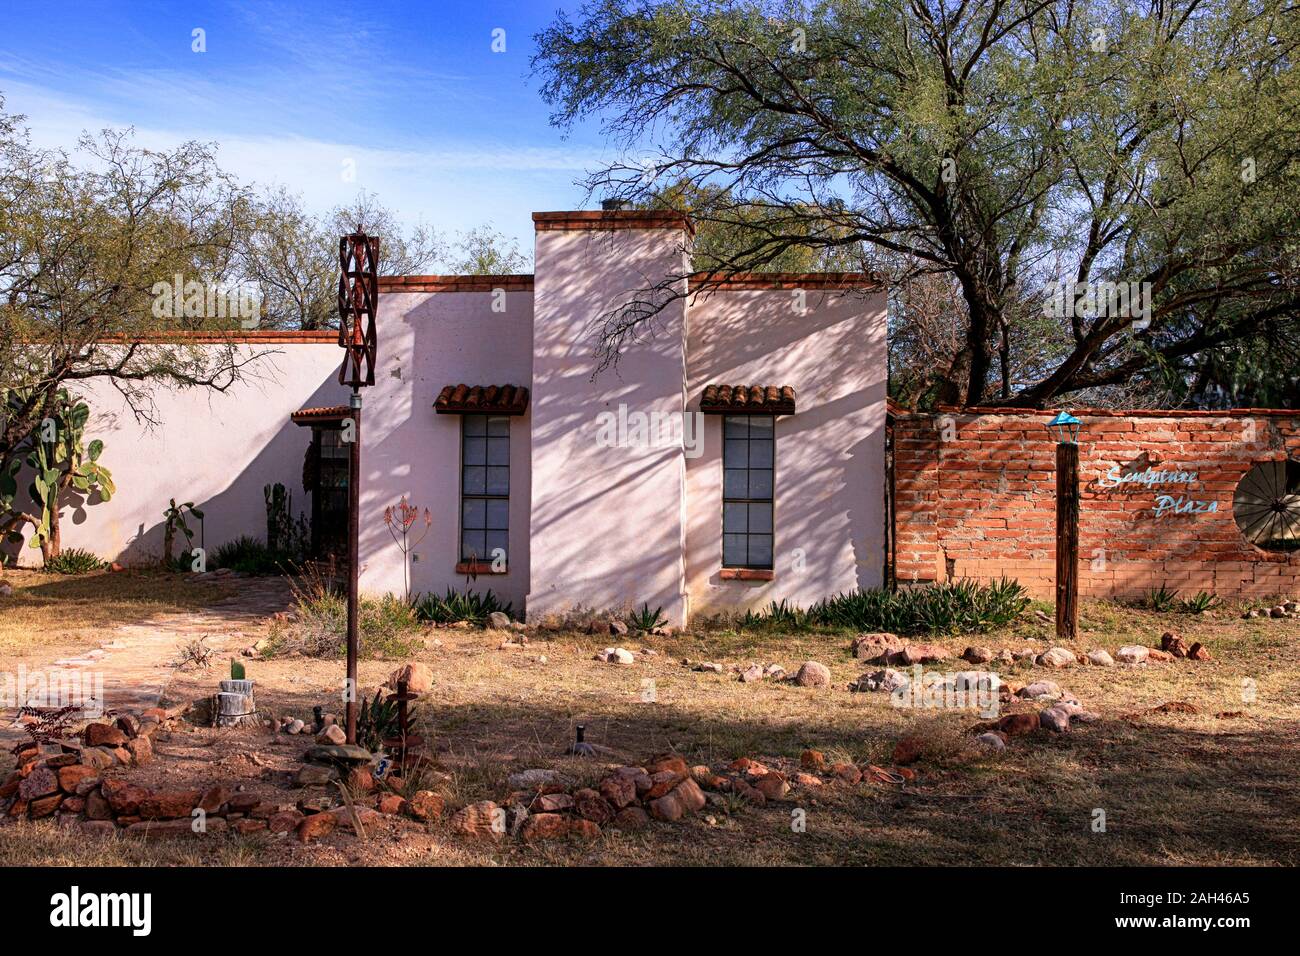 A delapidated artist's sculpture Plaza in old Tubac, Arizona Stock Photo